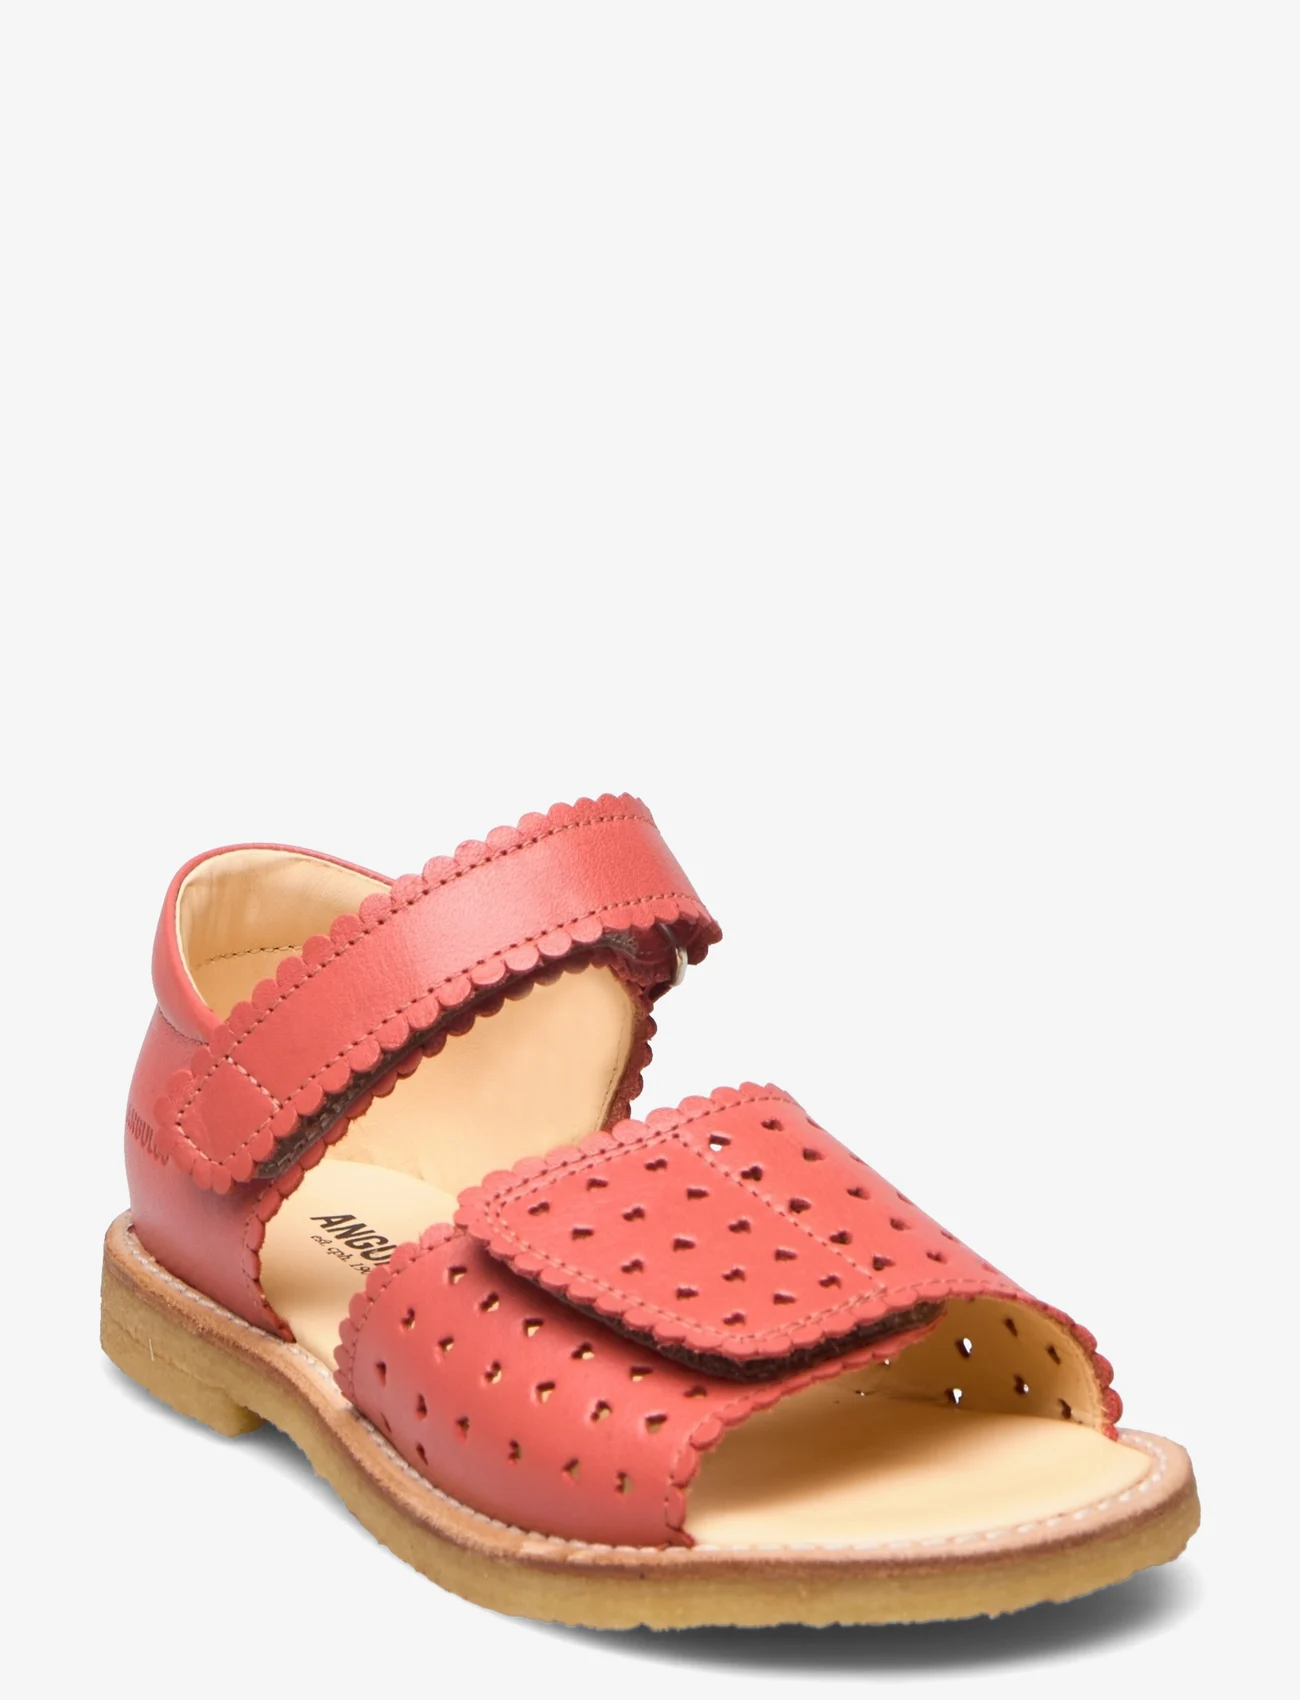 ANGULUS - Sandals - flat - open toe - clo - sommarfynd - 1591 coral - 0